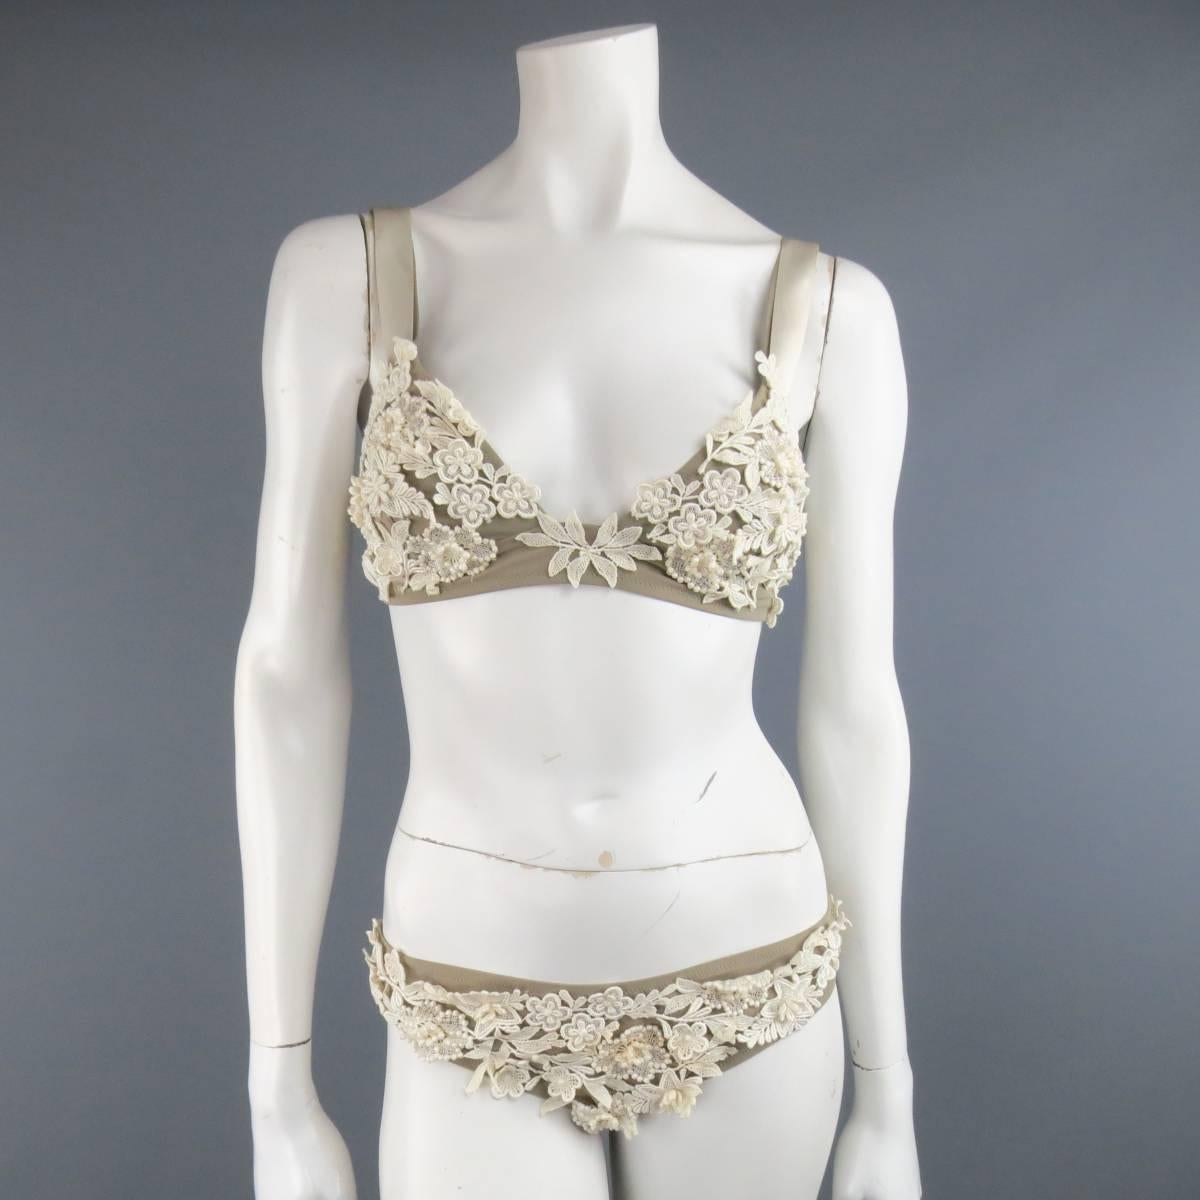 OSCAR DE LA RENTA Bridal Collection lingerie set in a thick taupe stretch fabric with cream lace appliques throughout and  includes a bra top with satin ribbon overlay straps and matching low rise briefs. Made in Italy.
 
Good Pre-Owned